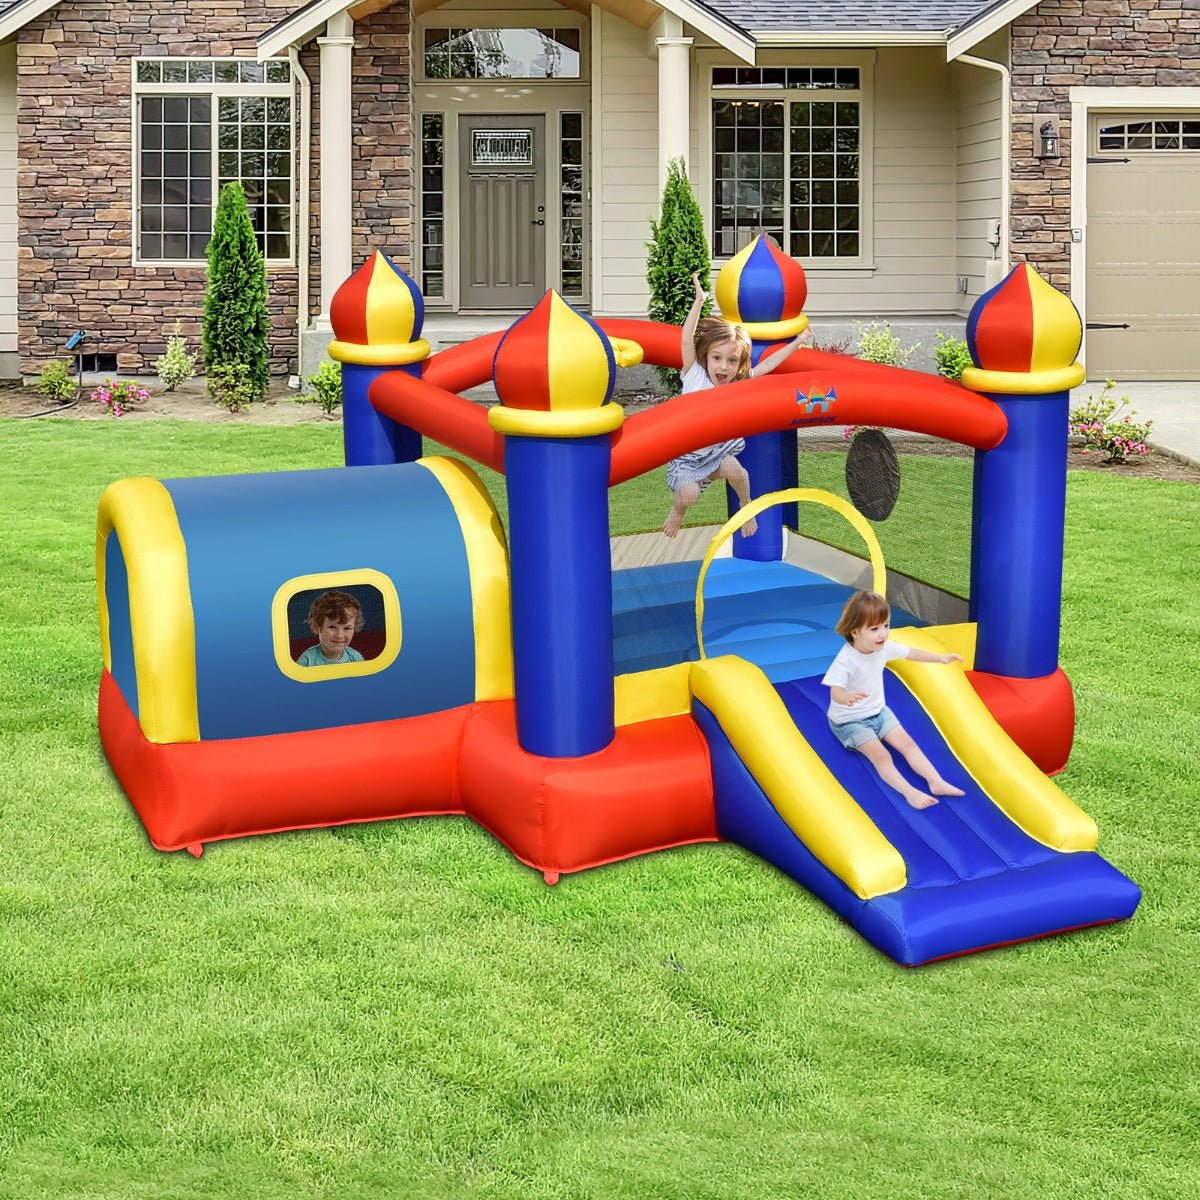 Kids Inflatable Bounce Castle with Slide - 5 Fun Activities in One